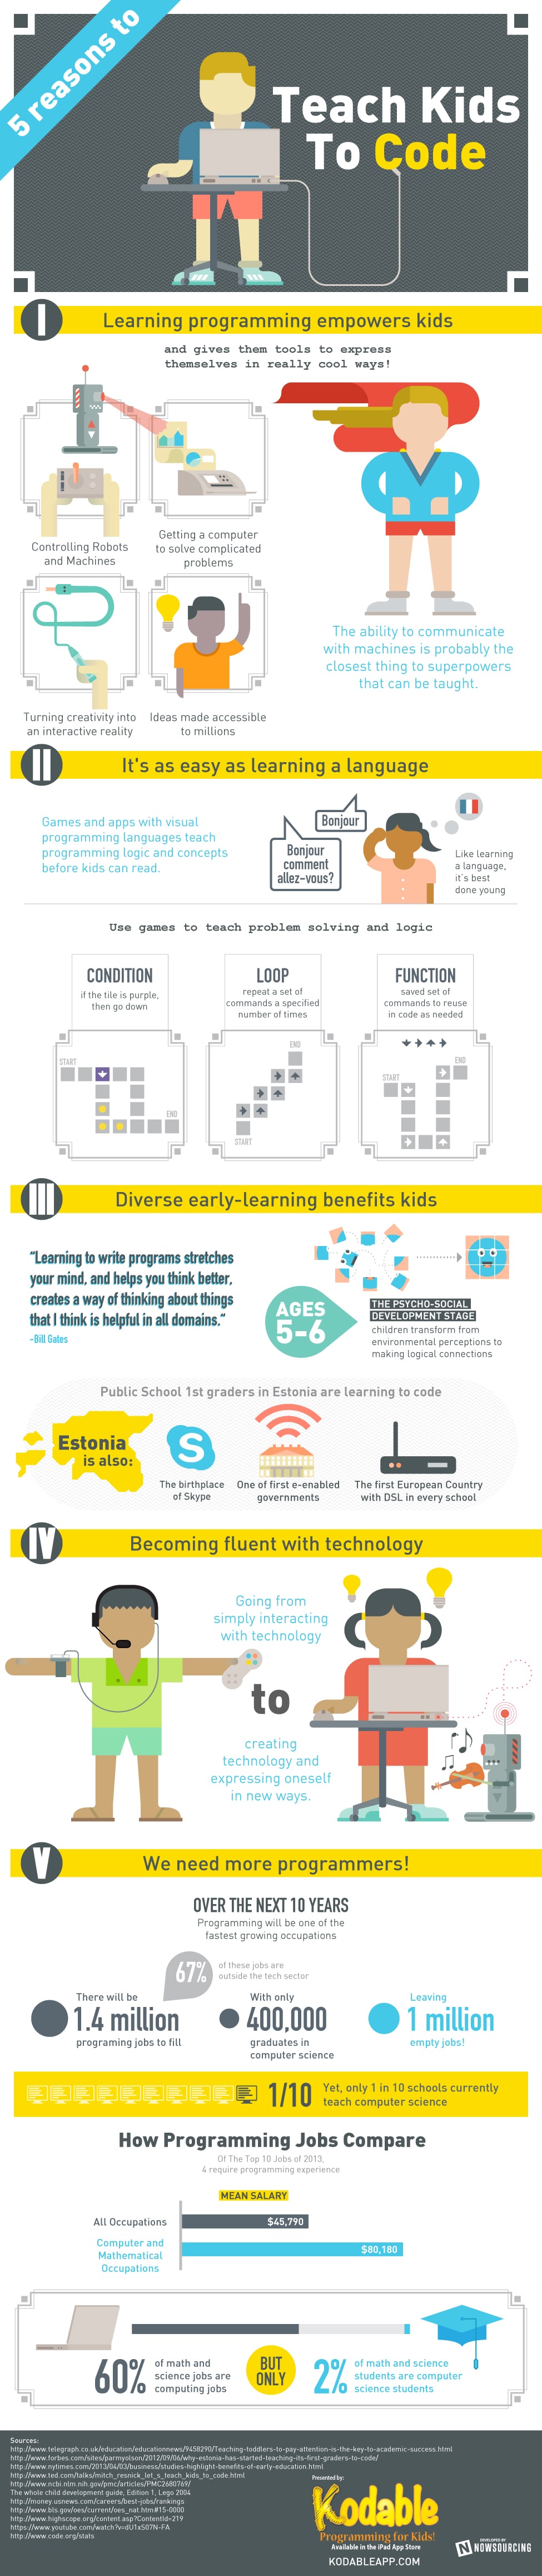 5 Reasons Why It’s A Good Idea To Teach Kids How To Code [Infographic]